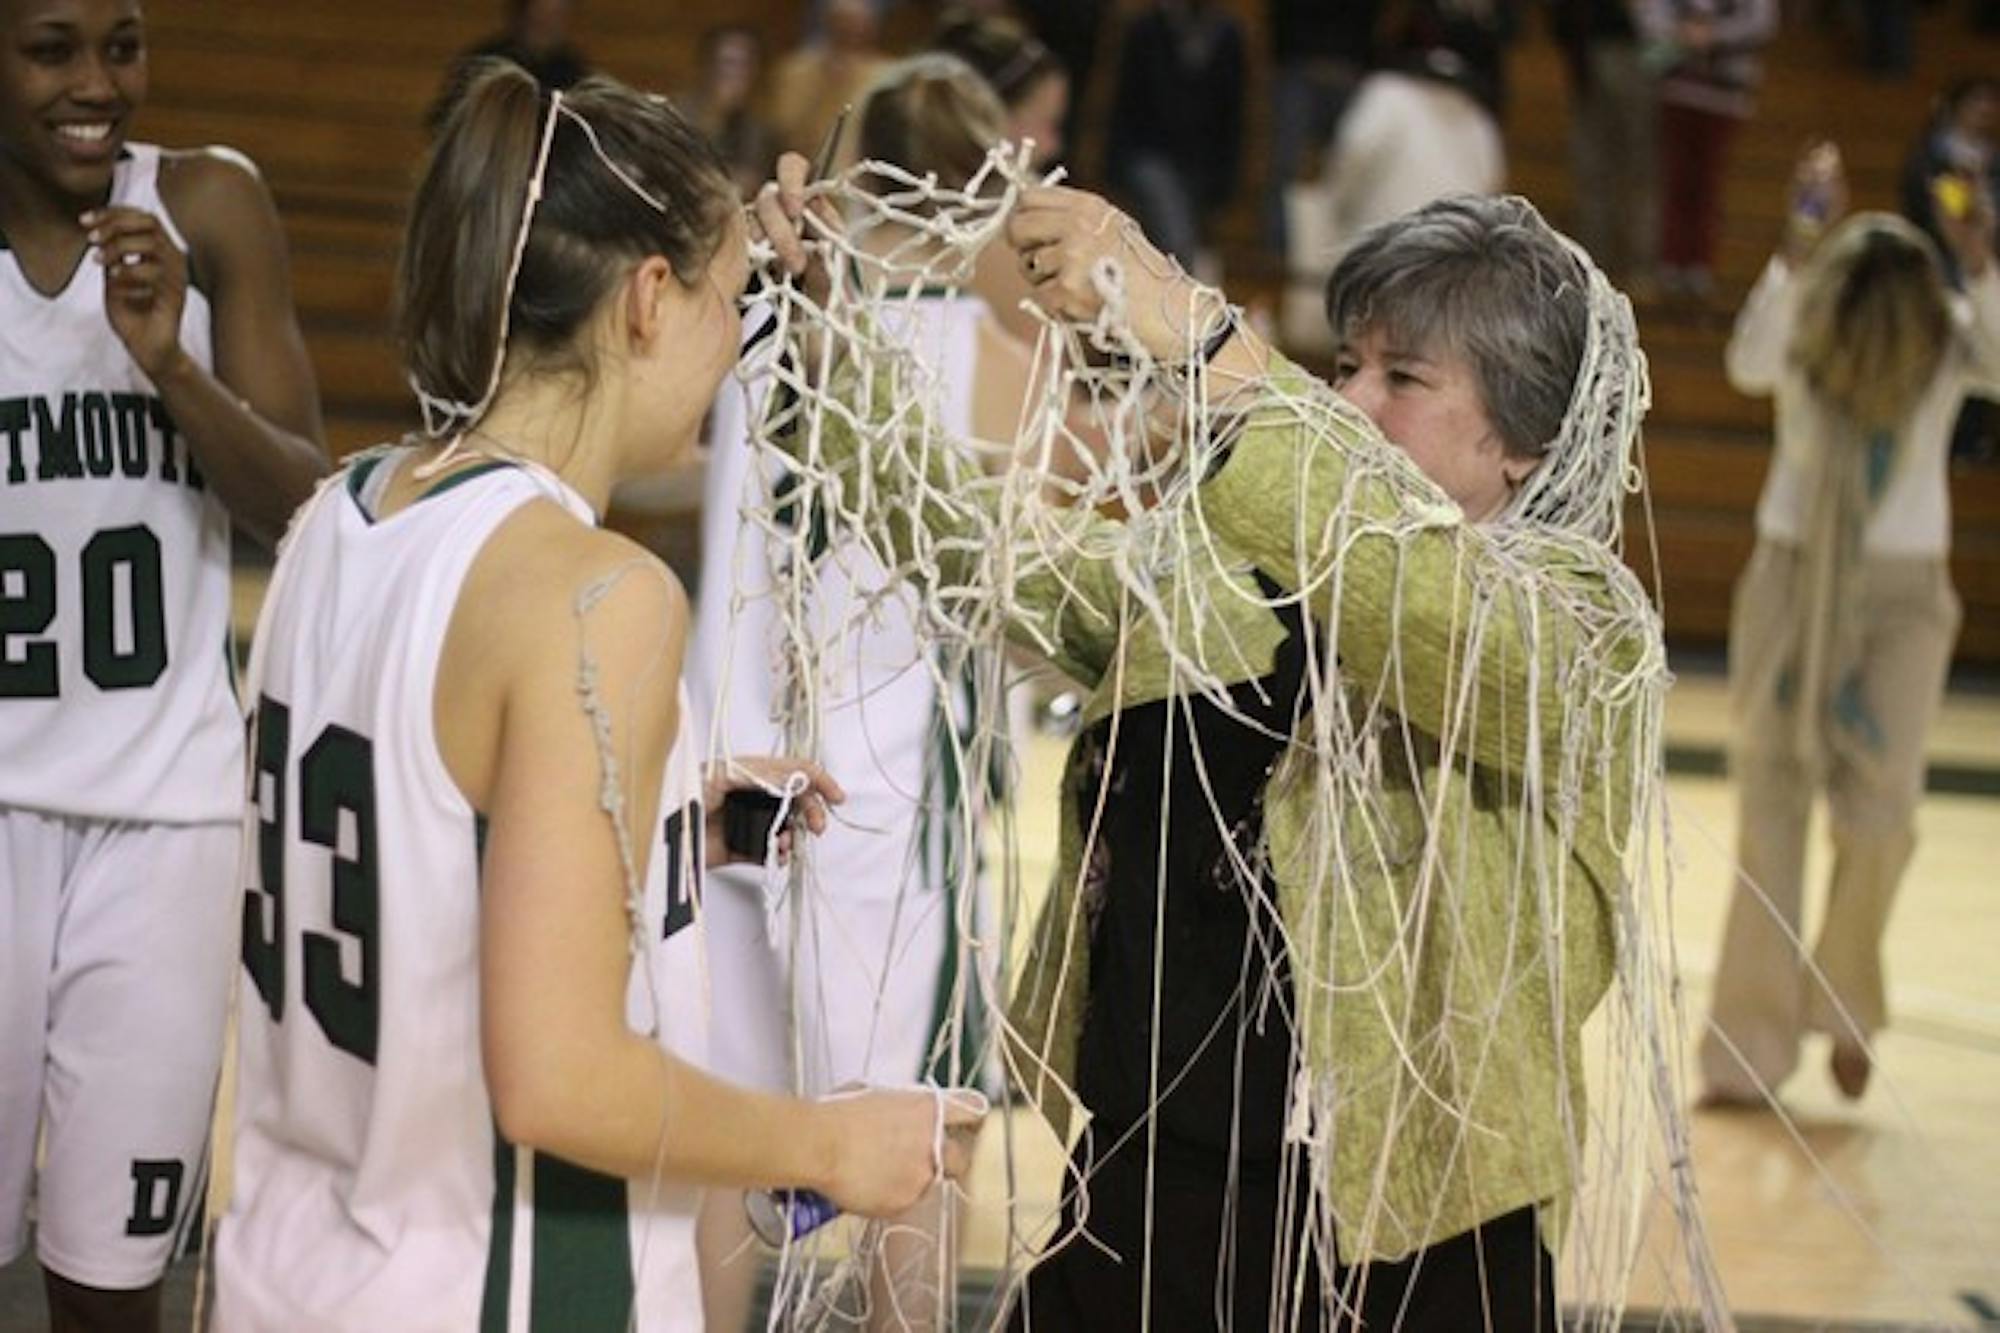 Silly-string-covered head coach Chris Wielgus presents Koren Schram '09 with the net during the postgame celebration after the women's basketball team won its 17th Ivy League championship.